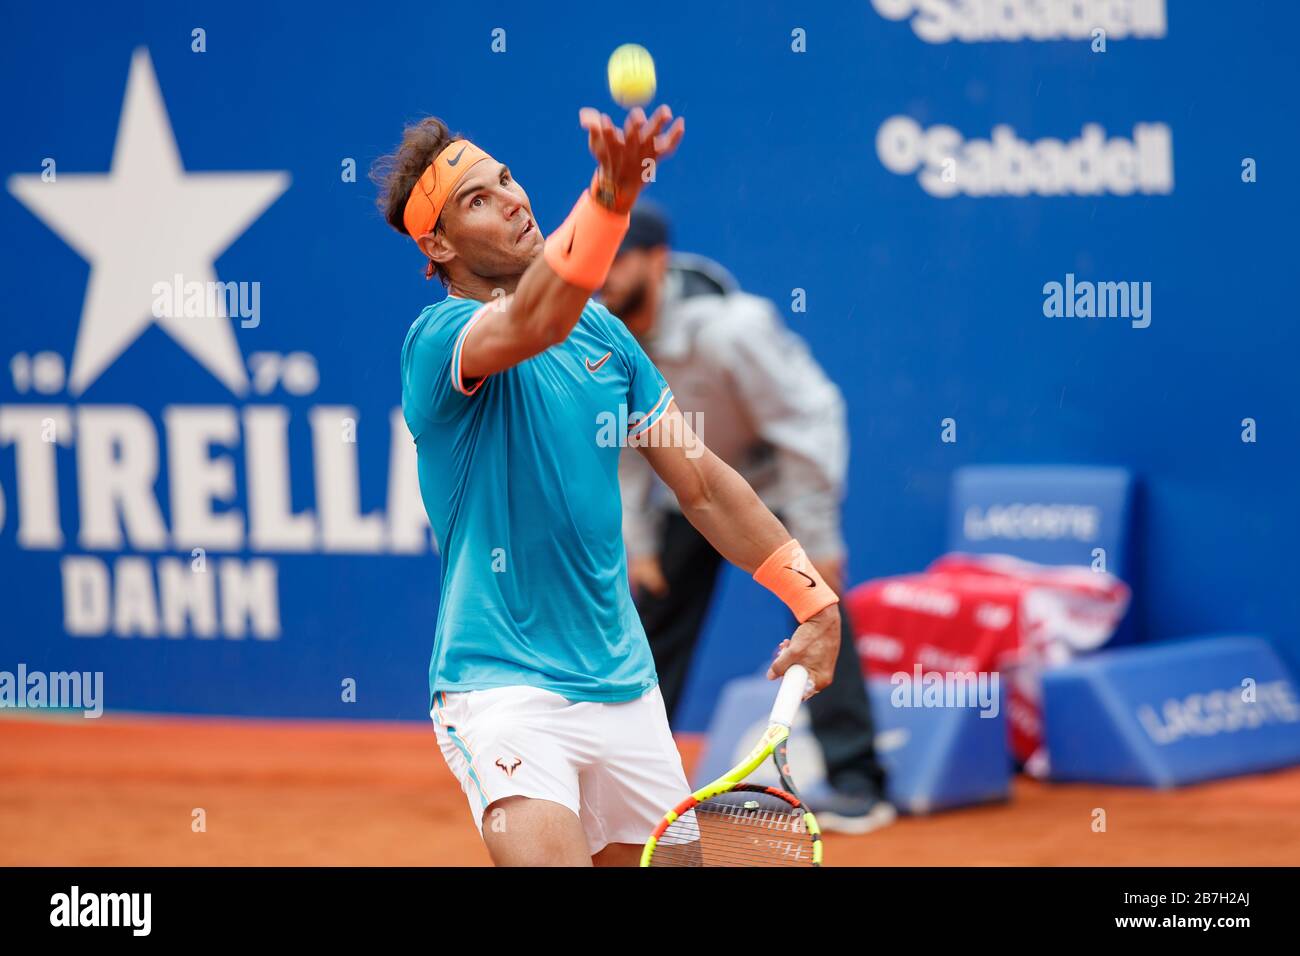 Rafael Nadal from Spain during the ATP 500 Barcelona Open Banc Sabadell 67  Trofeo Conde de Godo in Reial Club Tenis de Barcelona on 25 of April of 201  Stock Photo - Alamy